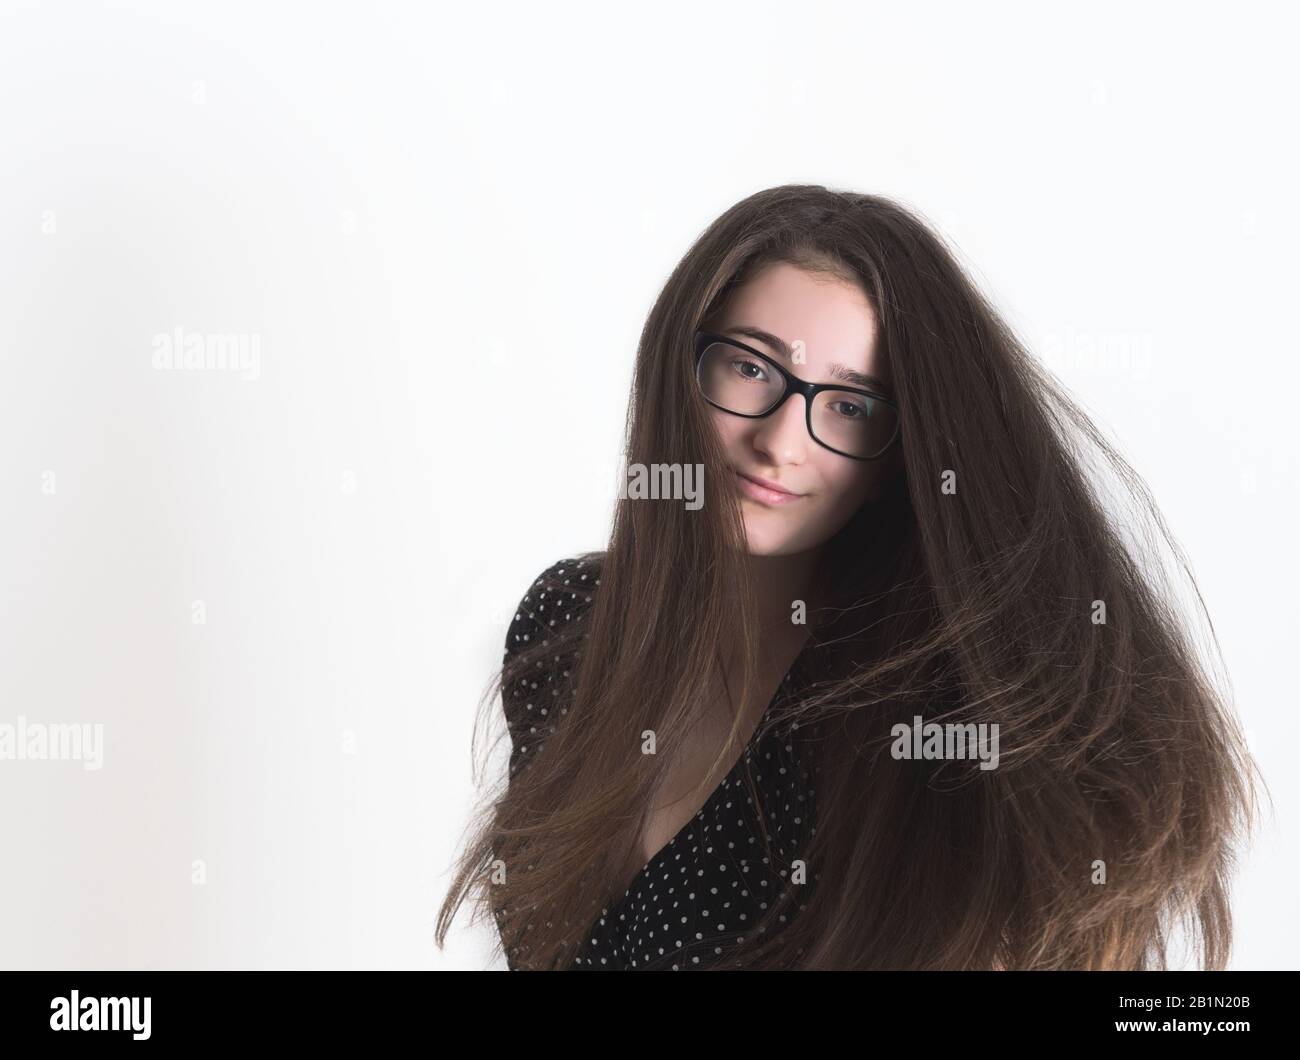 Portrait of a Bespectacled Long-haired Brunette Teen Girl Stock Photo